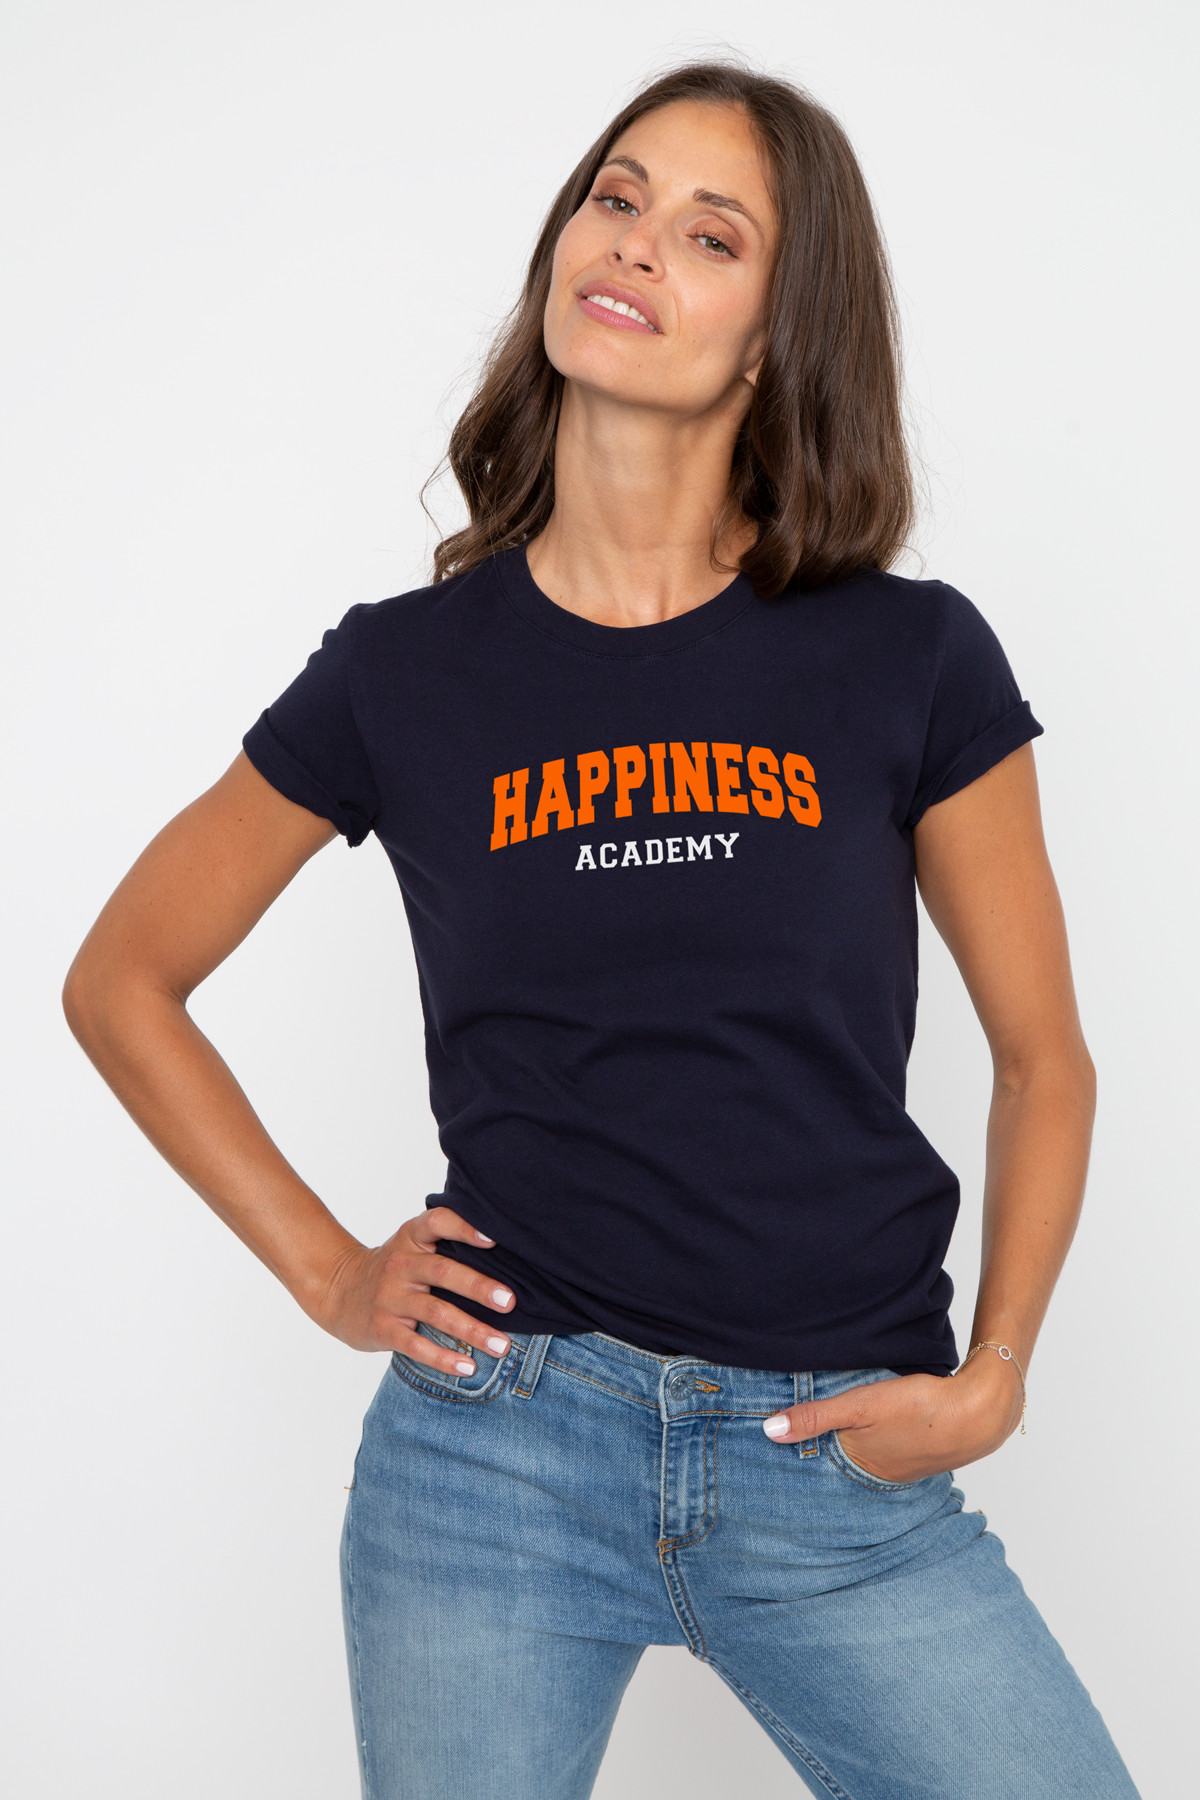 Photo de T-SHIRTS COL ROND T-shirt HAPPINESS ACADEMY chez French Disorder